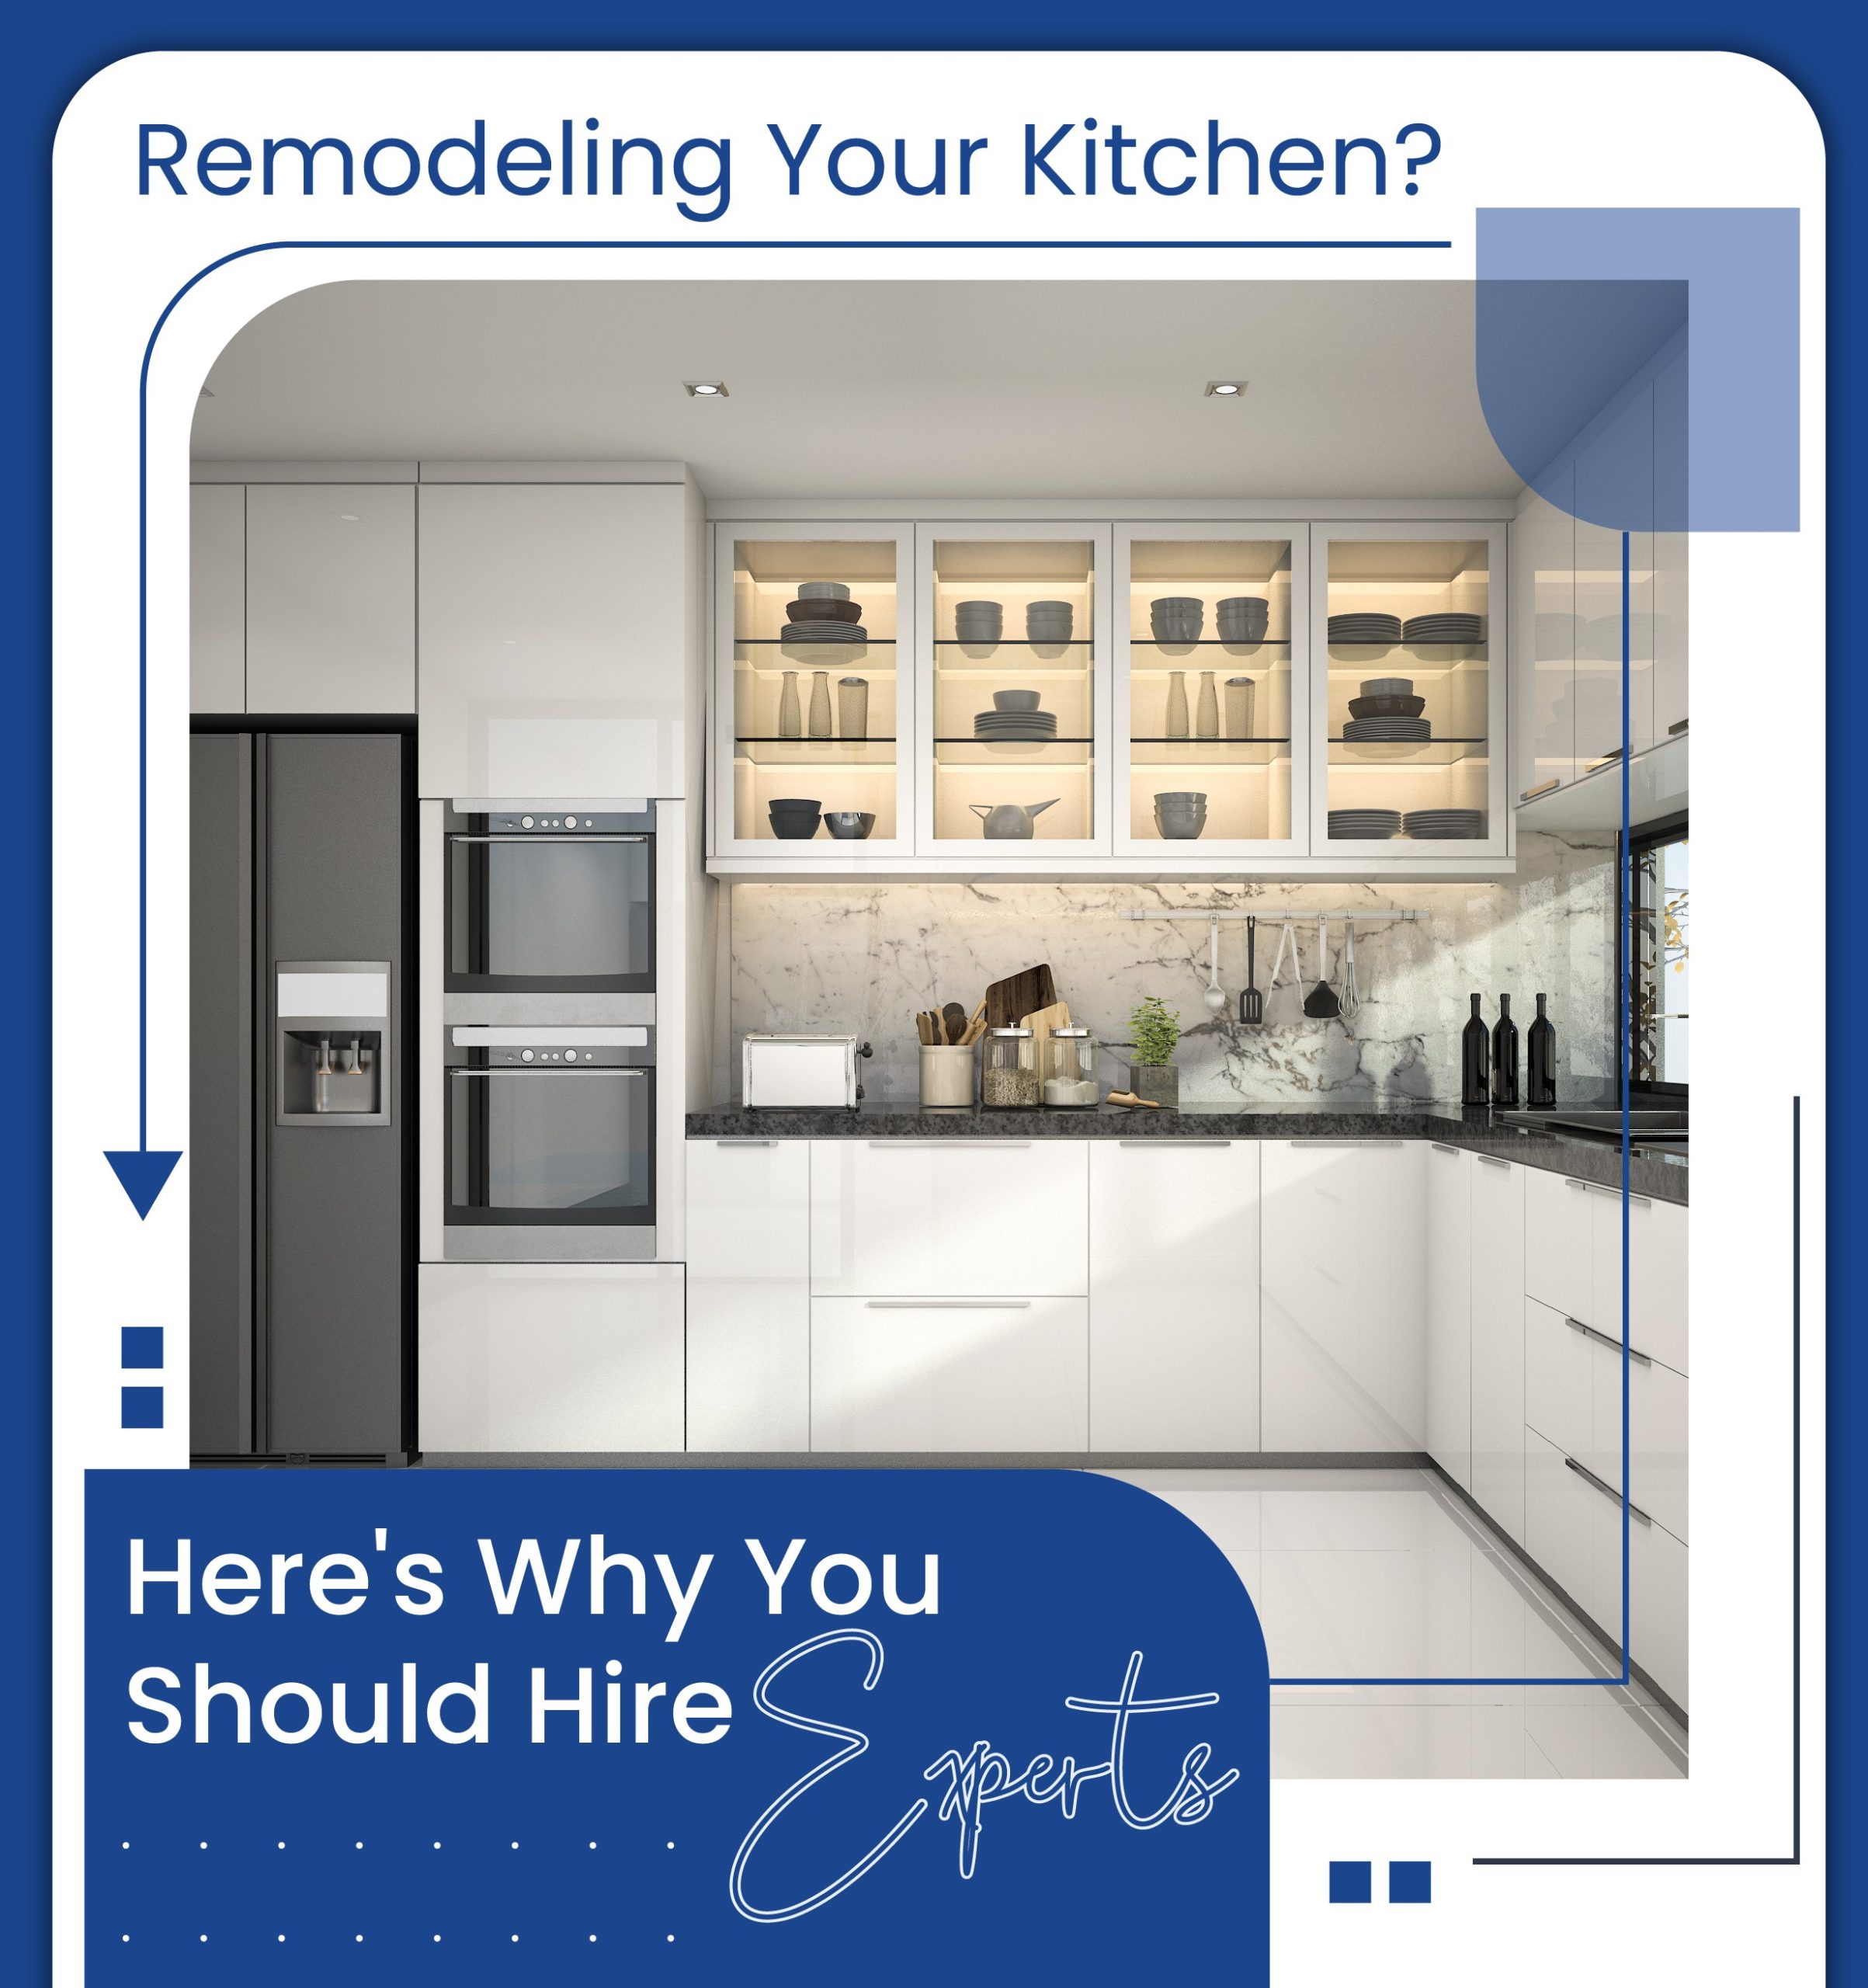 Remodeling Your Kitchen? Here Why You Should Hire Experts